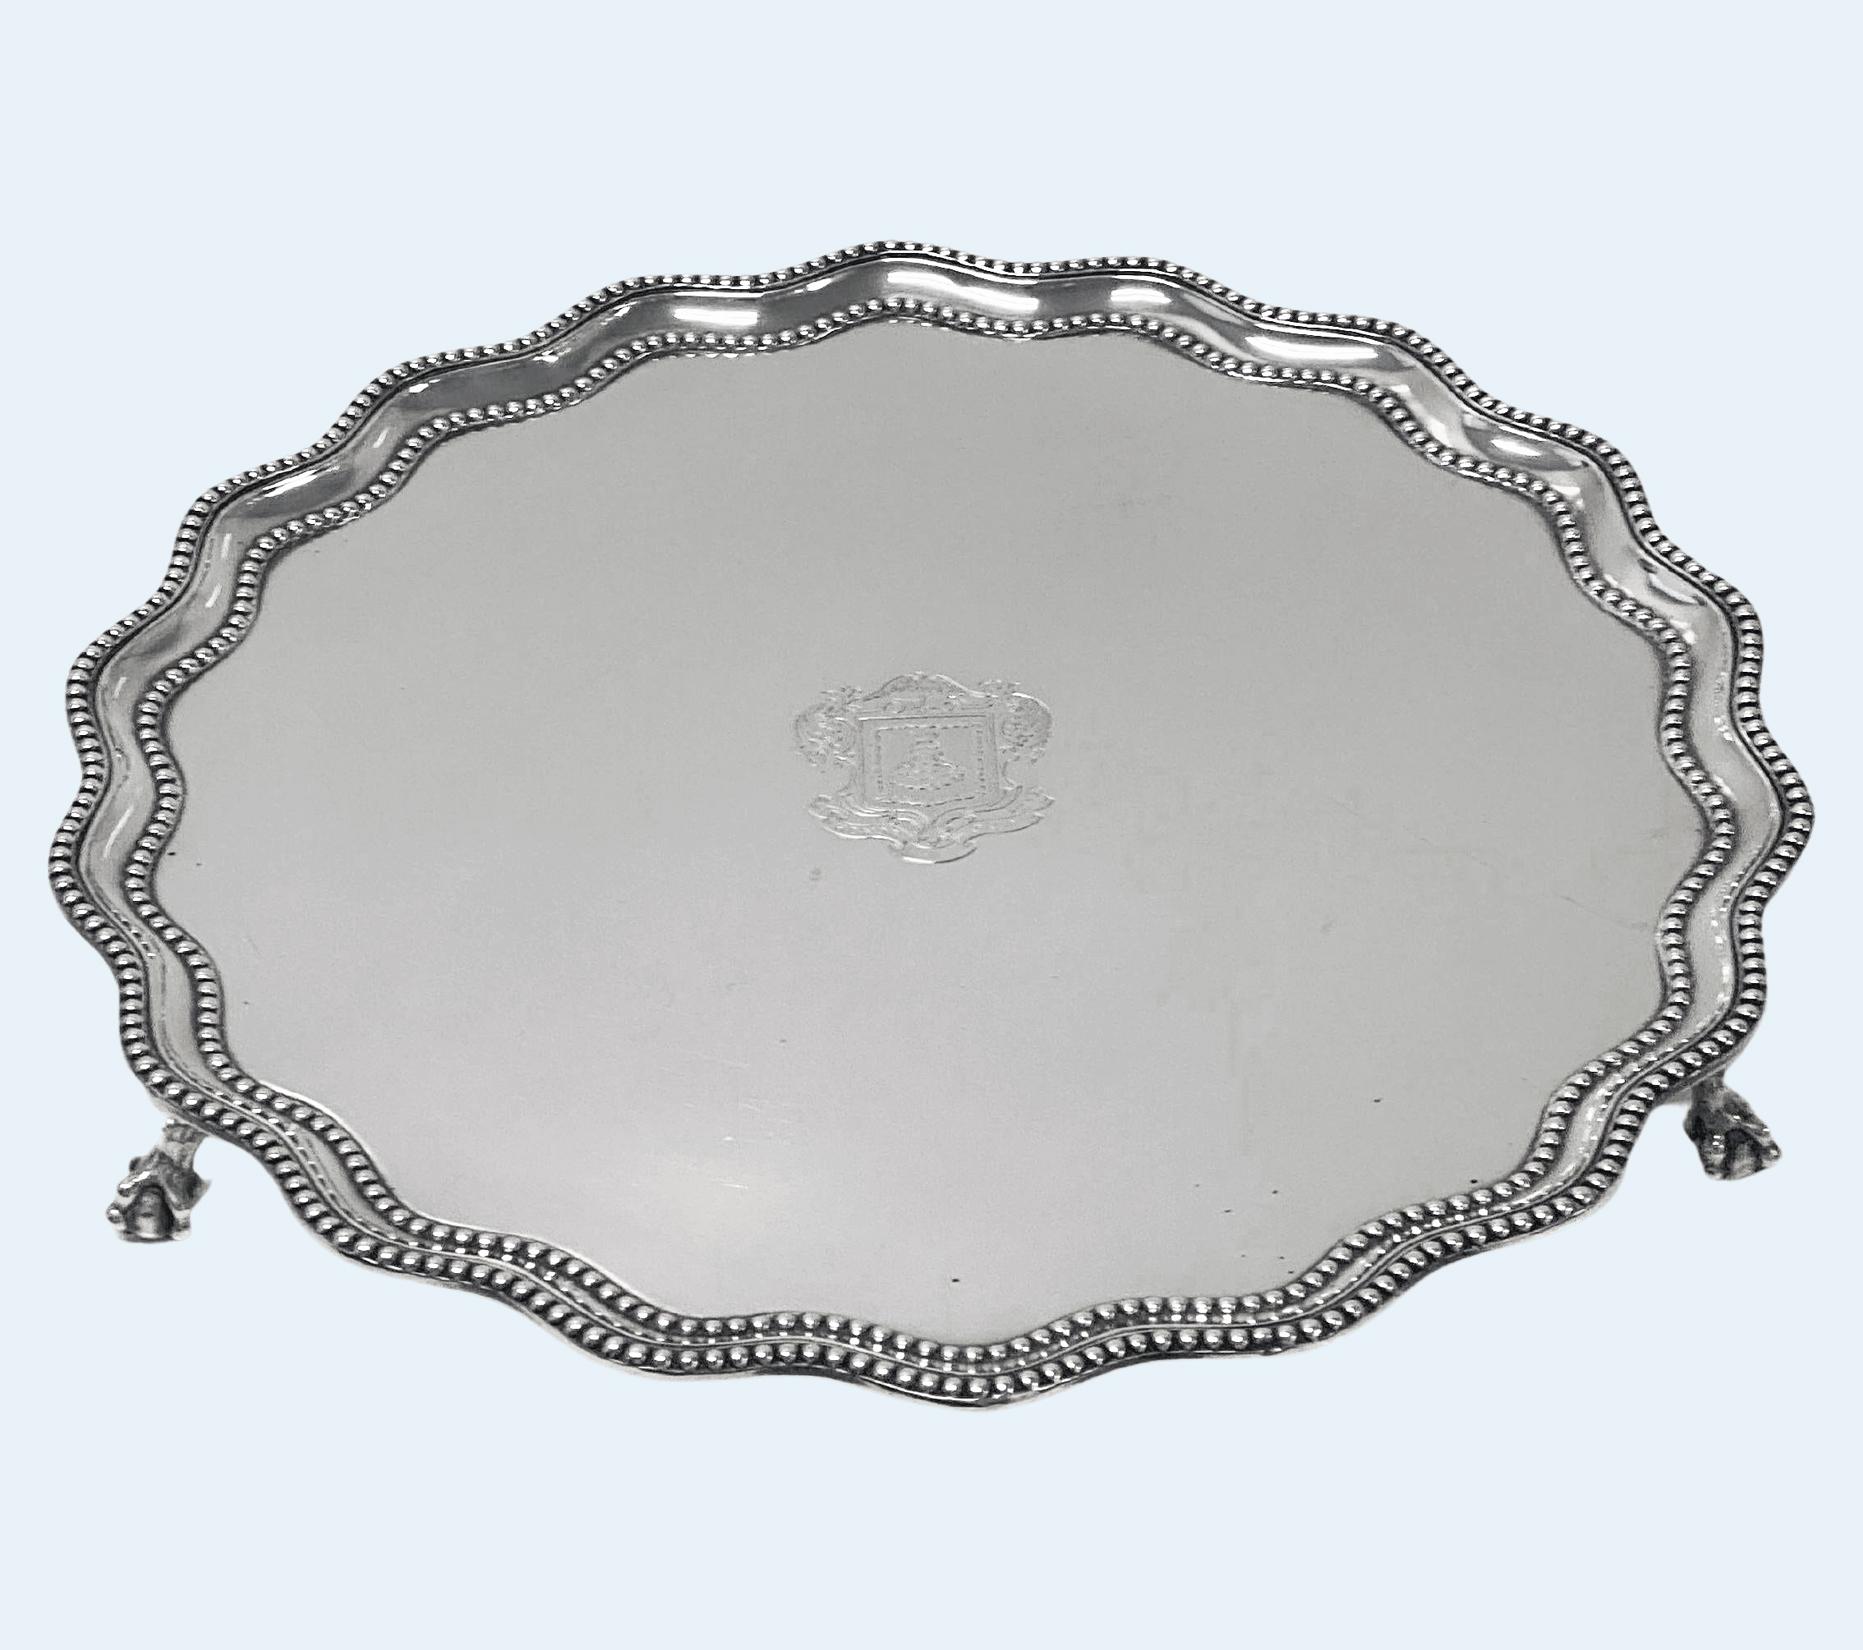 Mercers Company Garrard Antique Silver large Salver by James Garrard, London 1897.
Shaped circular form with a raised beaded wavy-edge rim, raised on three claw and ball feet, the underside engraved 